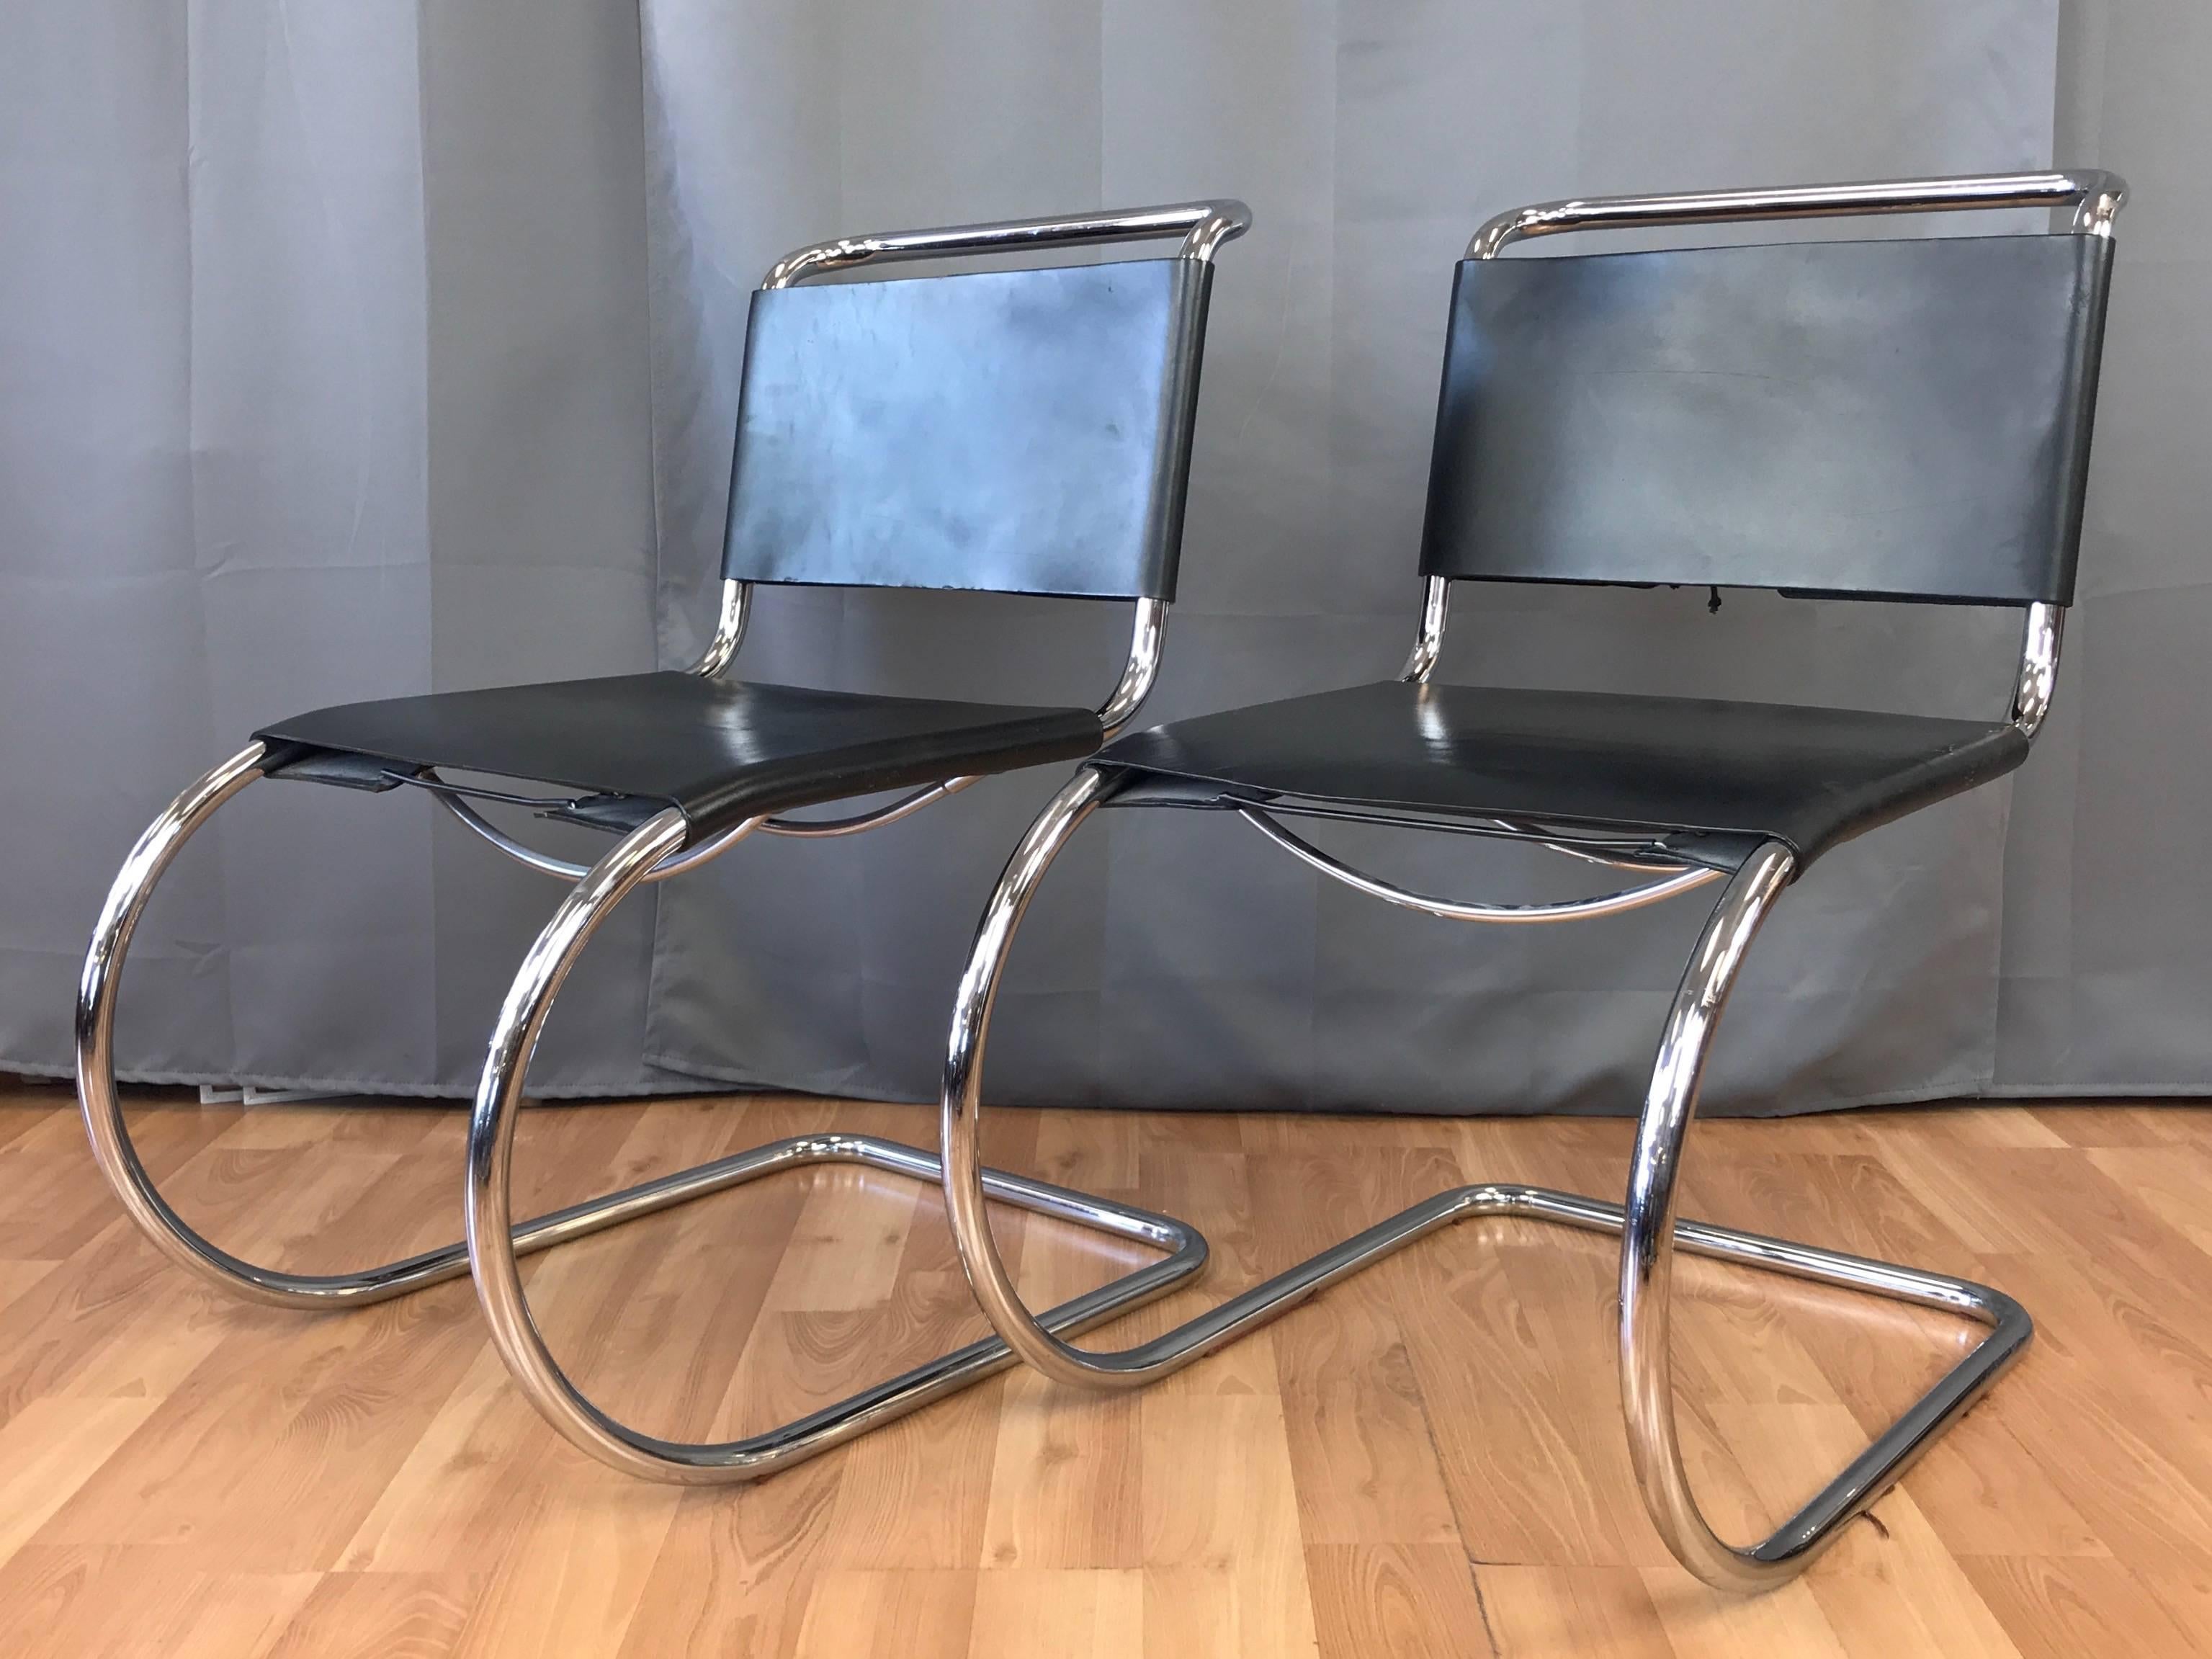 A pair of vintage MR side chairs by Ludwig Mies van der Rohe, manufactured and imported by Stendig. Designed in 1927, this pair dates from 1987 and is in great vintage condition. 

Iconic minimalist design features a cantilevered polished tubular